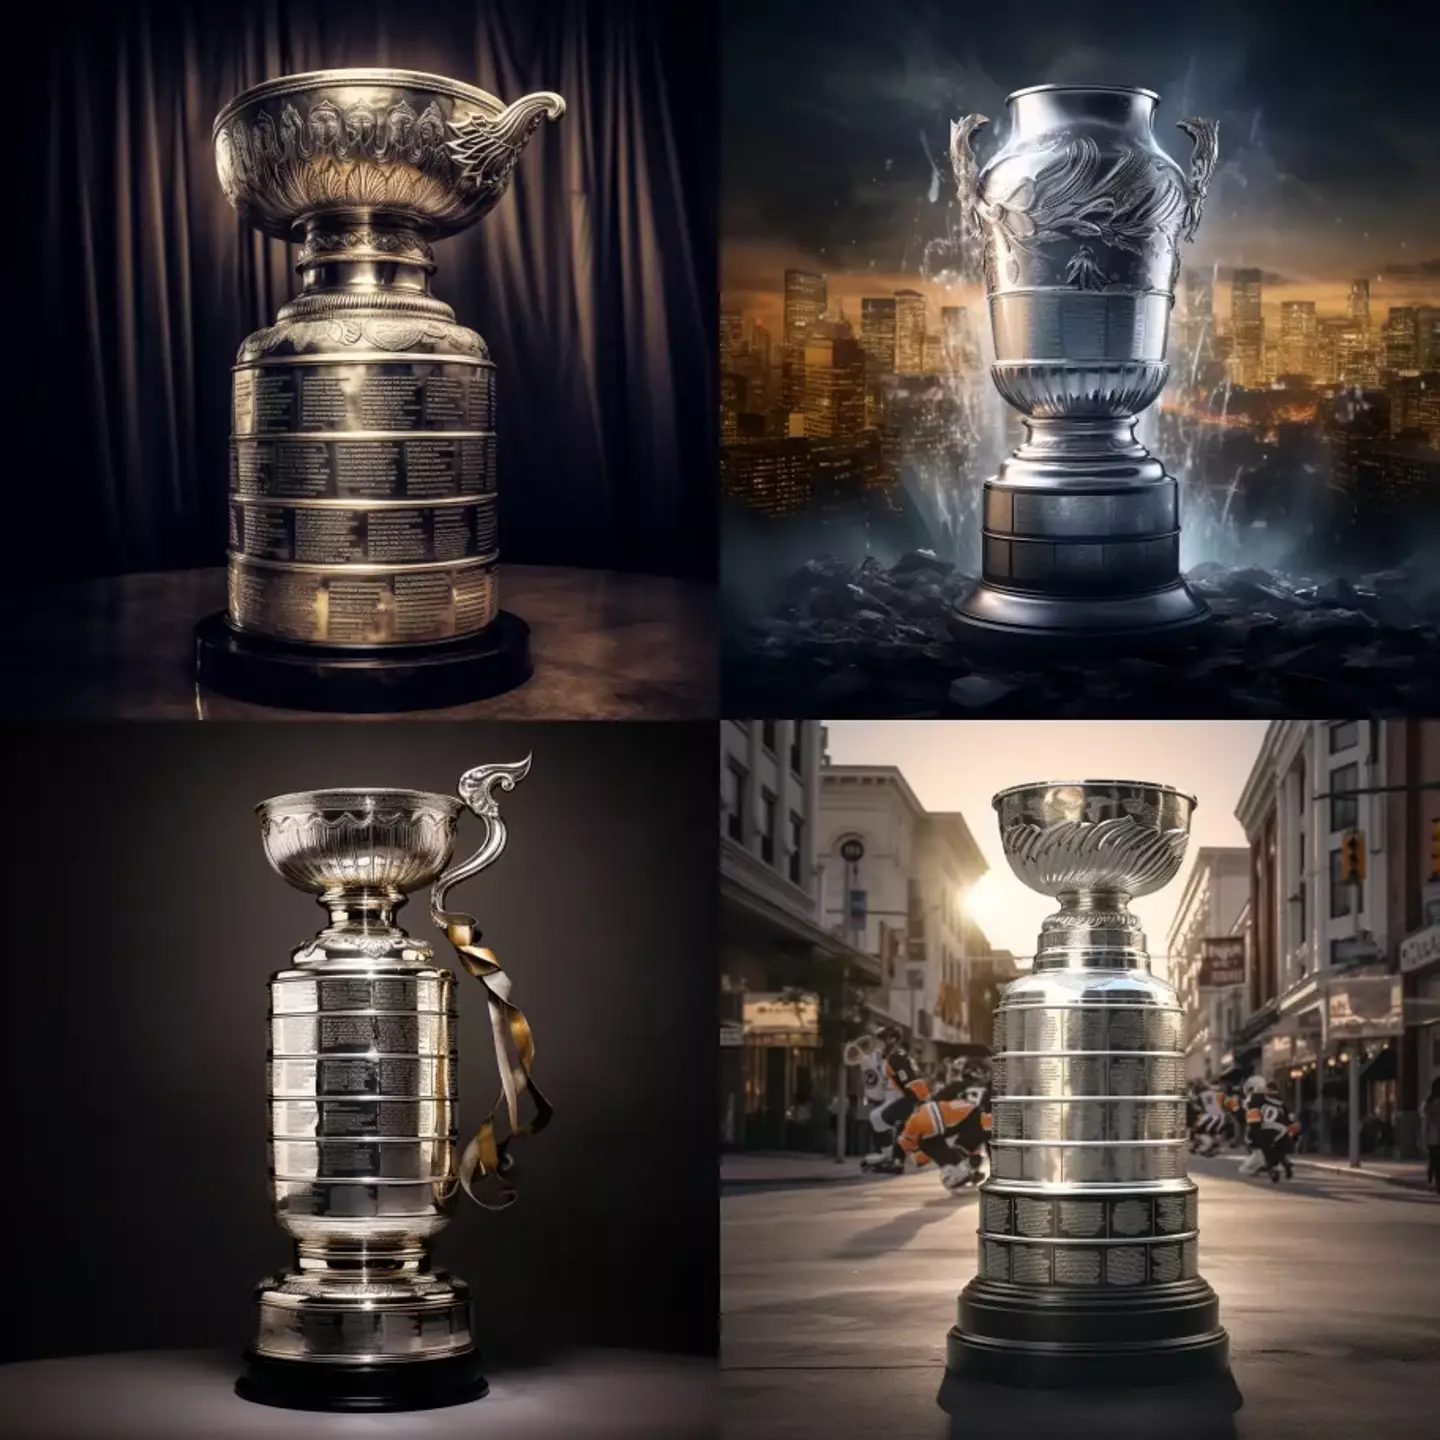 The Stanley Cup, reimagined in the future by AI.